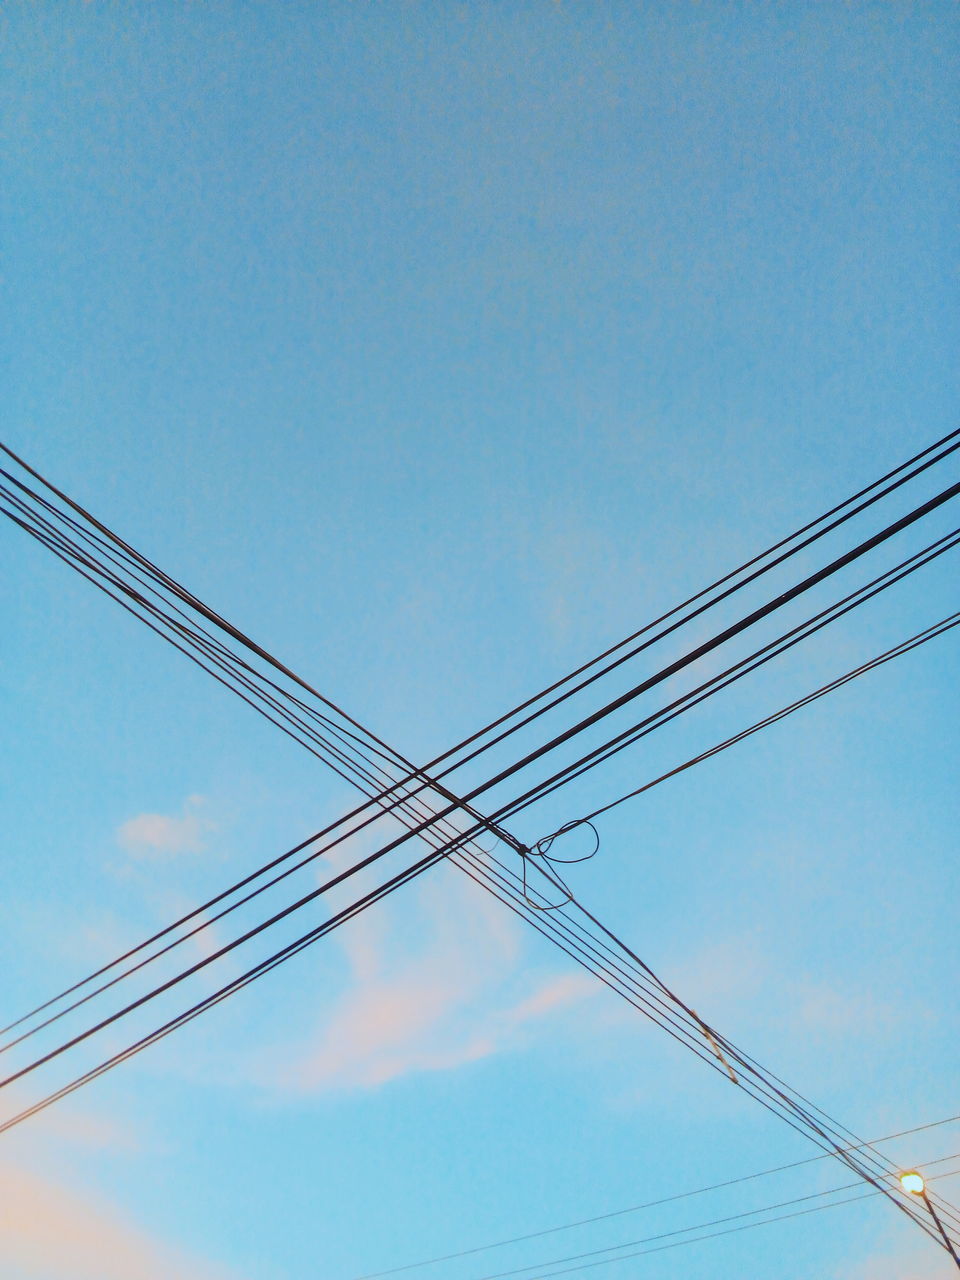 cable, sky, low angle view, electricity, power supply, connection, power line, blue, no people, technology, fuel and power generation, day, copy space, nature, clear sky, electricity pylon, outdoors, complexity, power cable, electrical equipment, telephone line, directly below, parallel